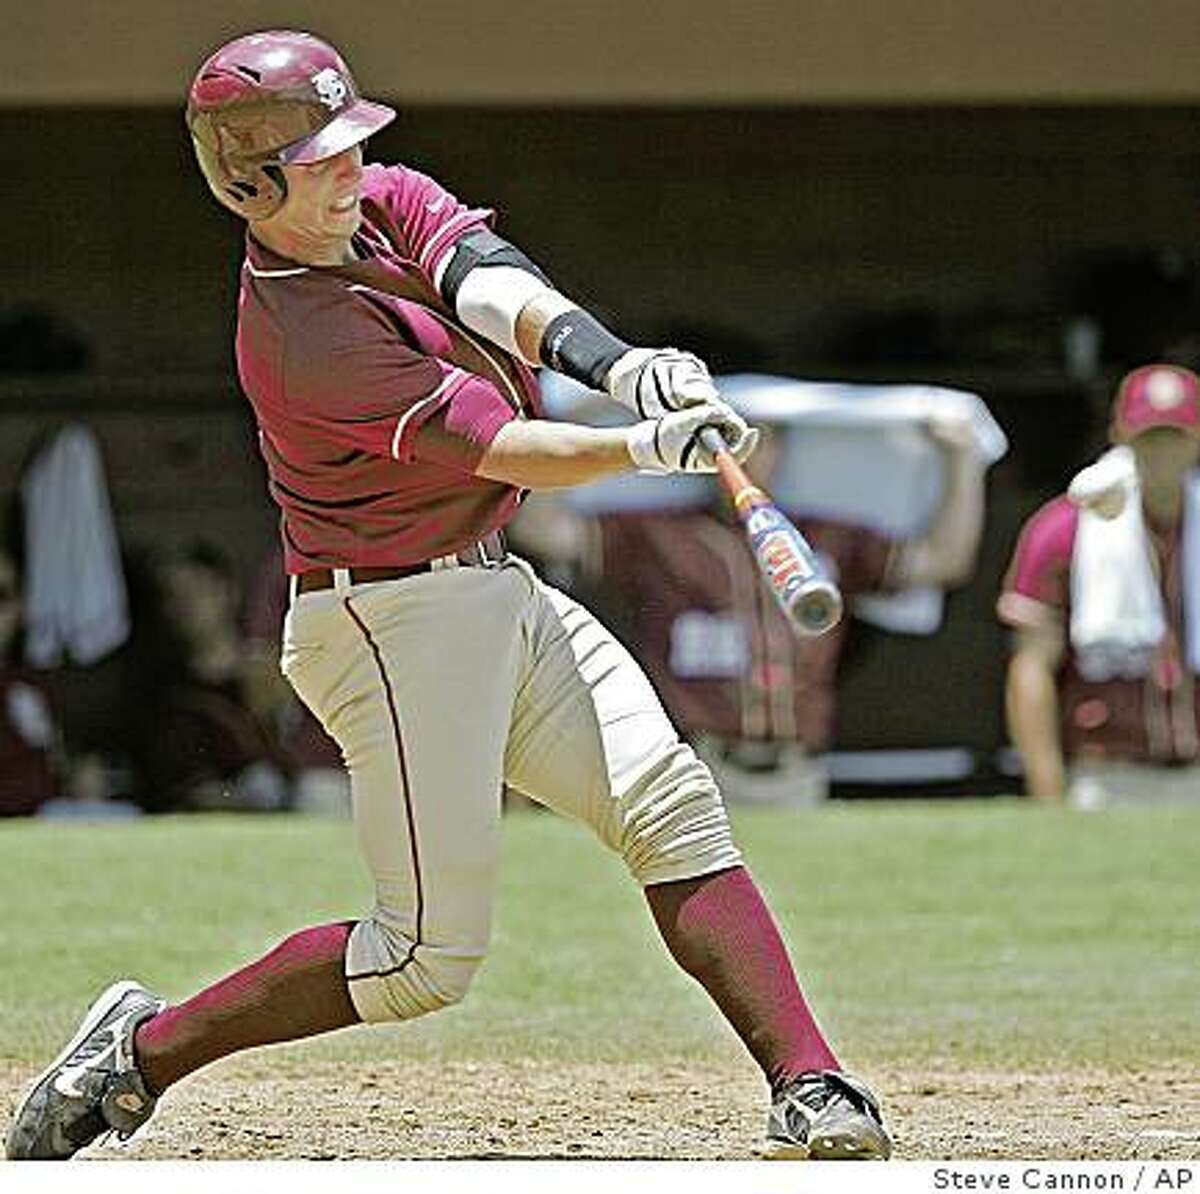 Florida State's Buster Posey connects for a grand slam in the third inning of a Tallahassee regional baseball game against Bucknell on Sunday, June 1, 2008 in Tallahassee, Fla. Florida State beat Bucknell 24-9.